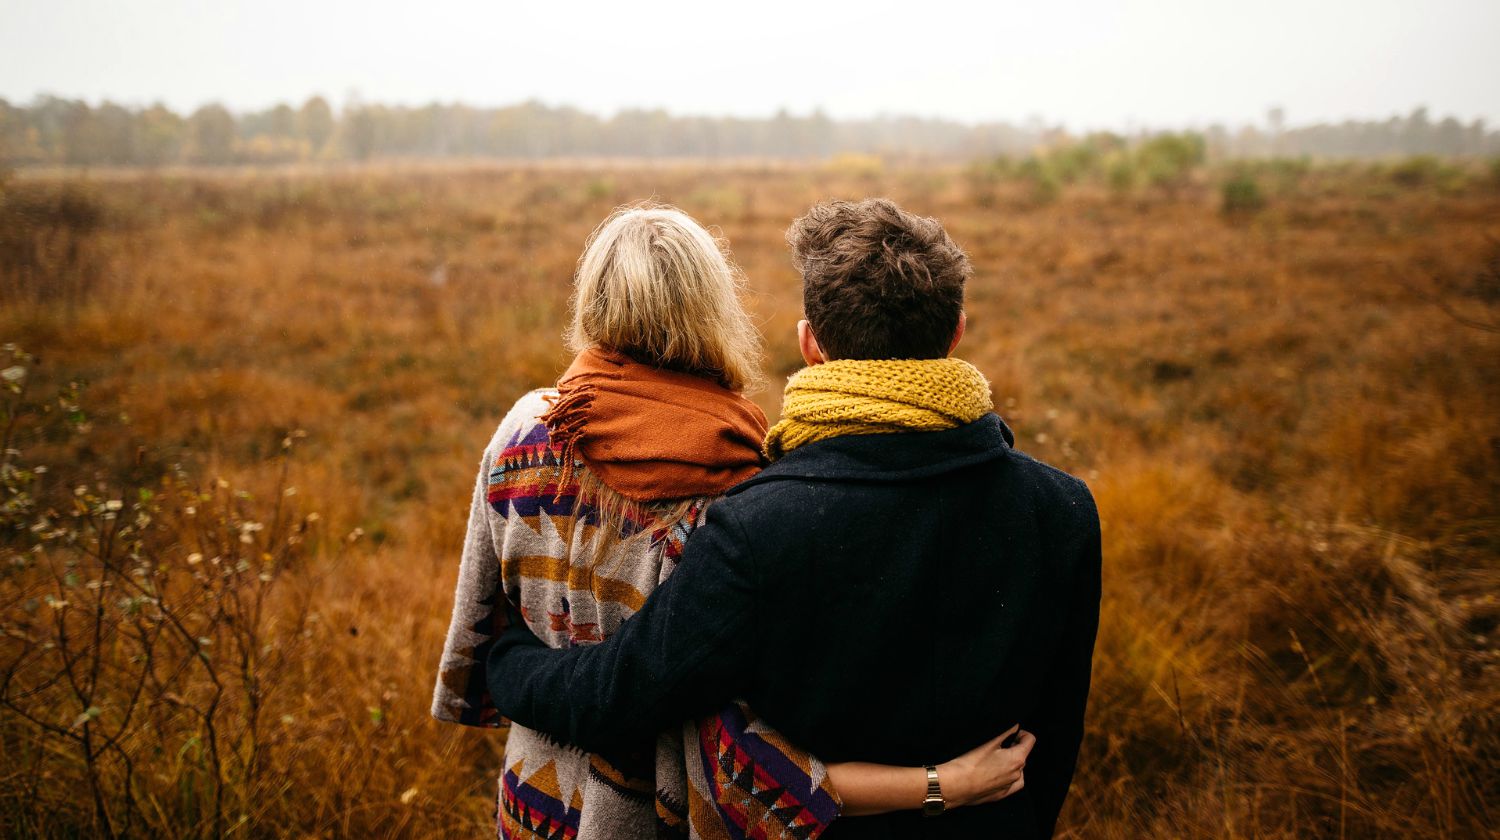 Feature | Couple looking in the fields | Couples Defense: What You Can Do With Your Partner To Stay Safe